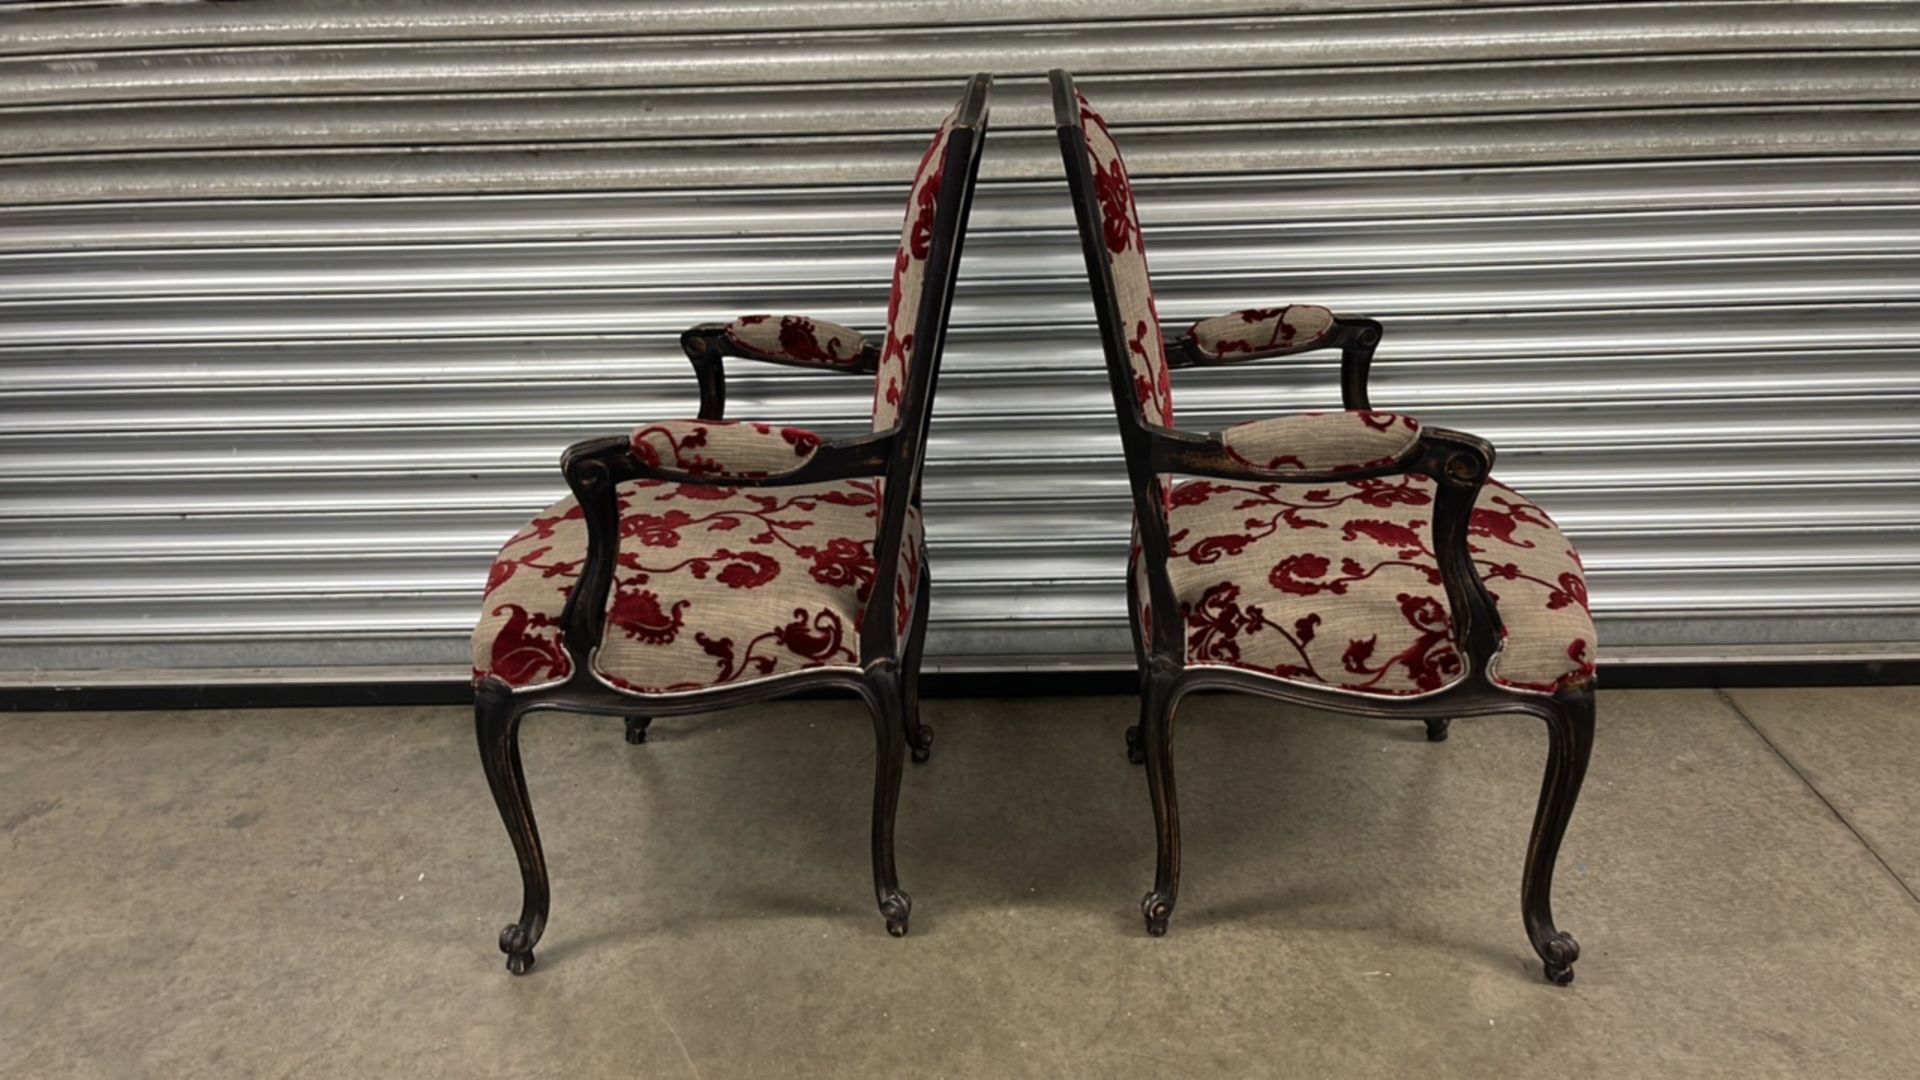 Pair of Roche Bobois Floral Dining Chairs with Arms RRP £650 Per Chair - Image 6 of 8